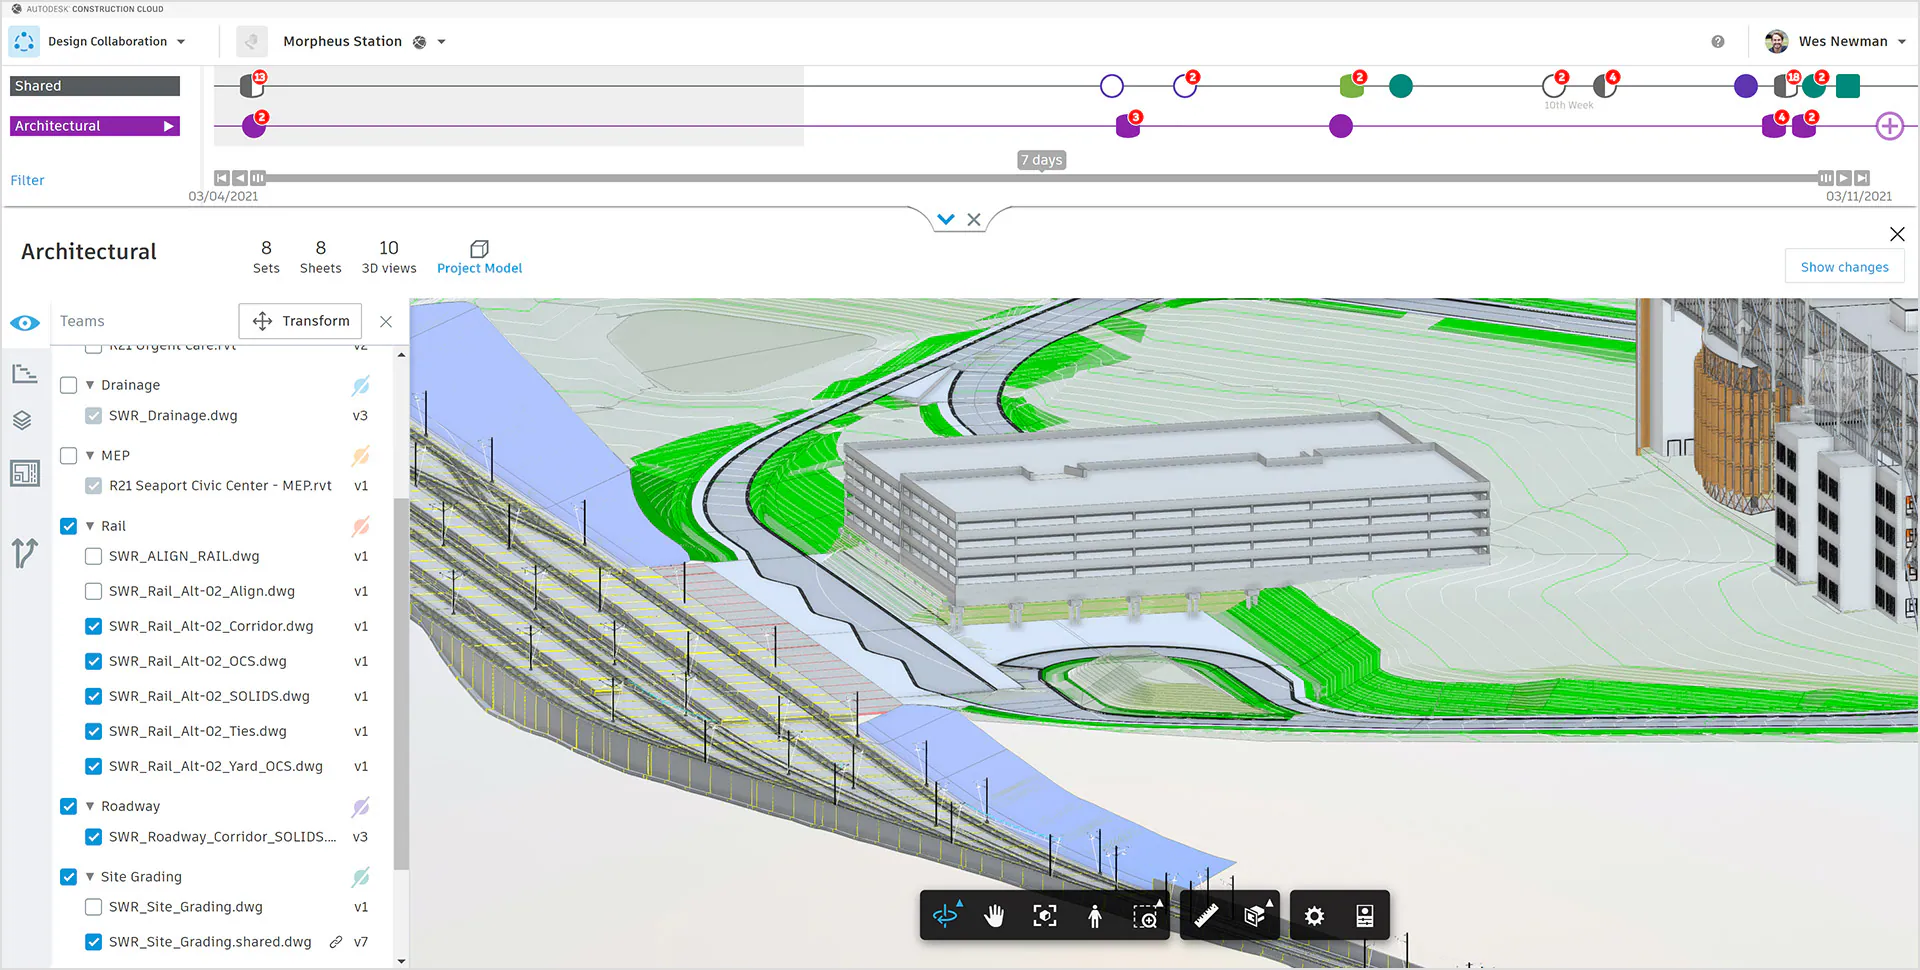 switching views of a 3D model in BIM collaborate software